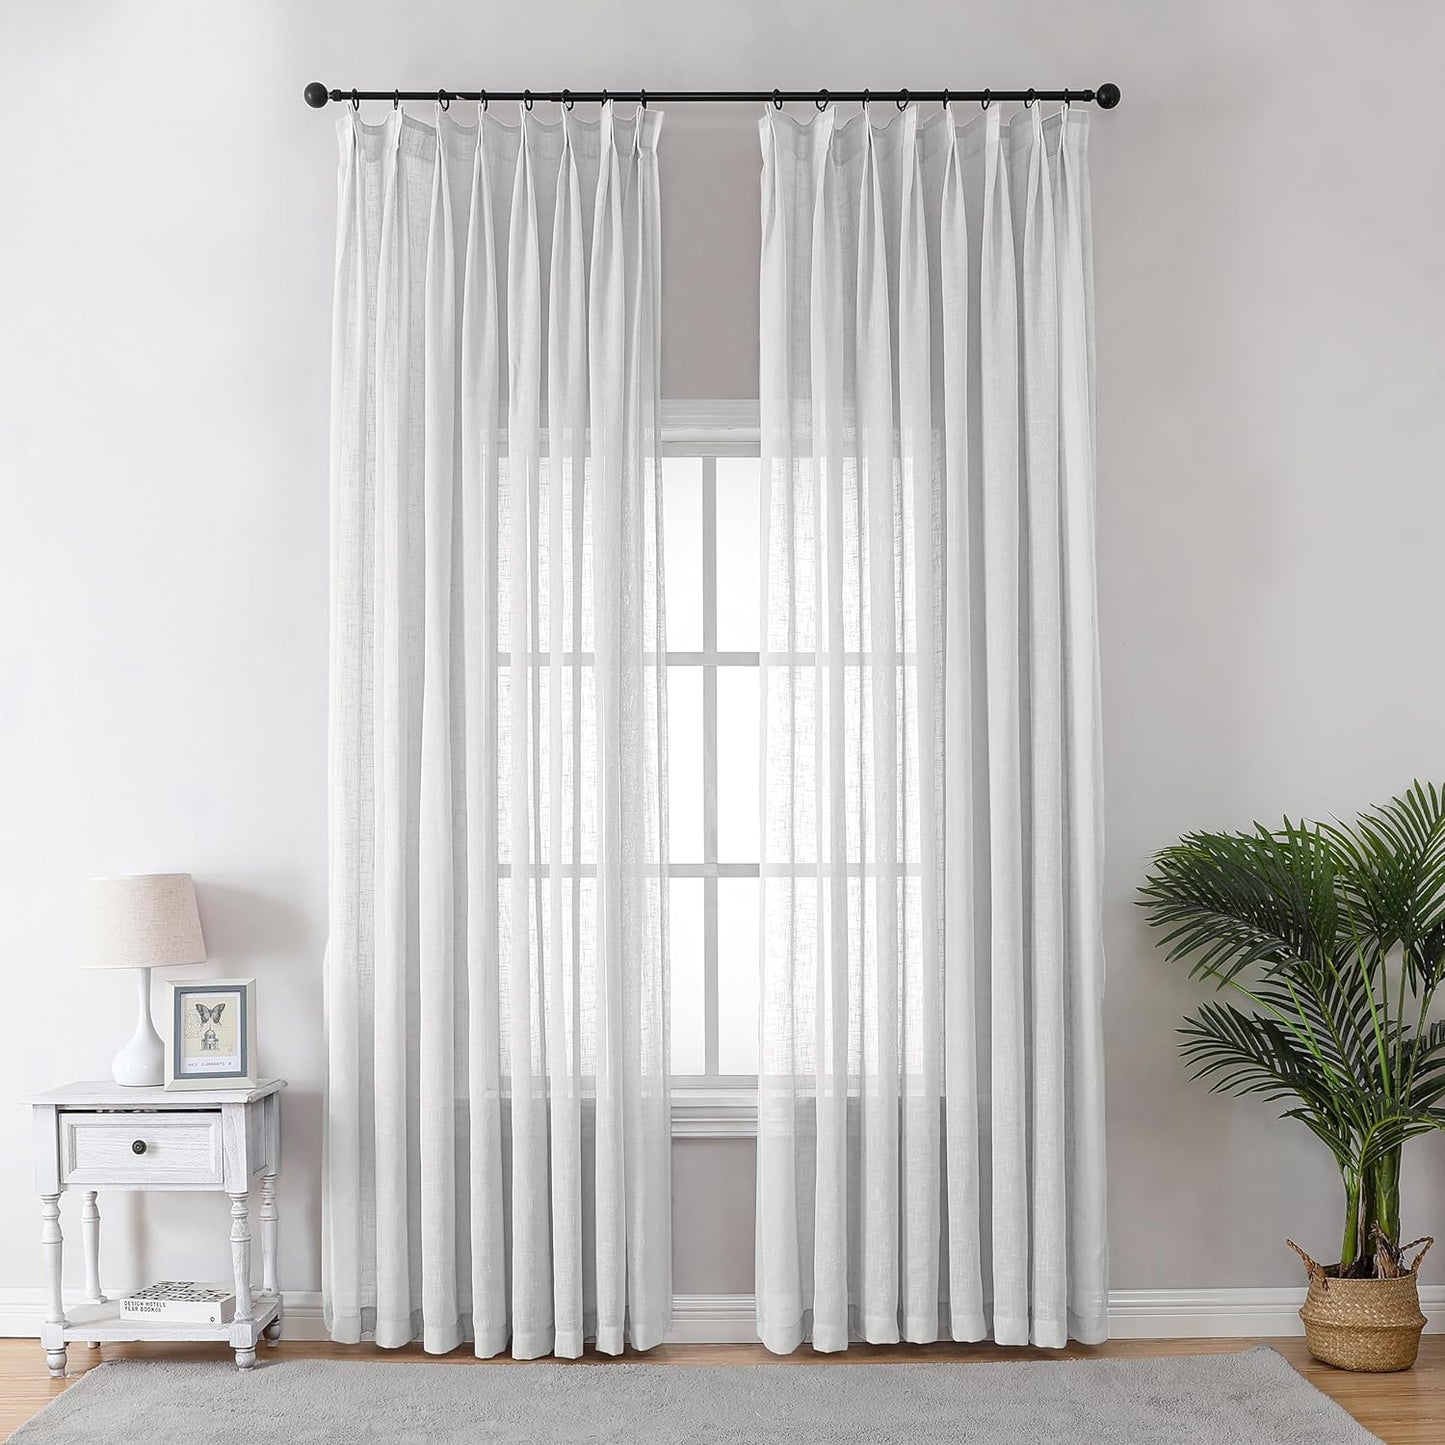 Hascemon Pinch Pleated Curtains, Sheer Drapes Light Filtering Curtains for Living Room and Bedroom Decor (1Panel, Light-Brown,100X96)  Hascemon Off-White 52"Wx96"L 